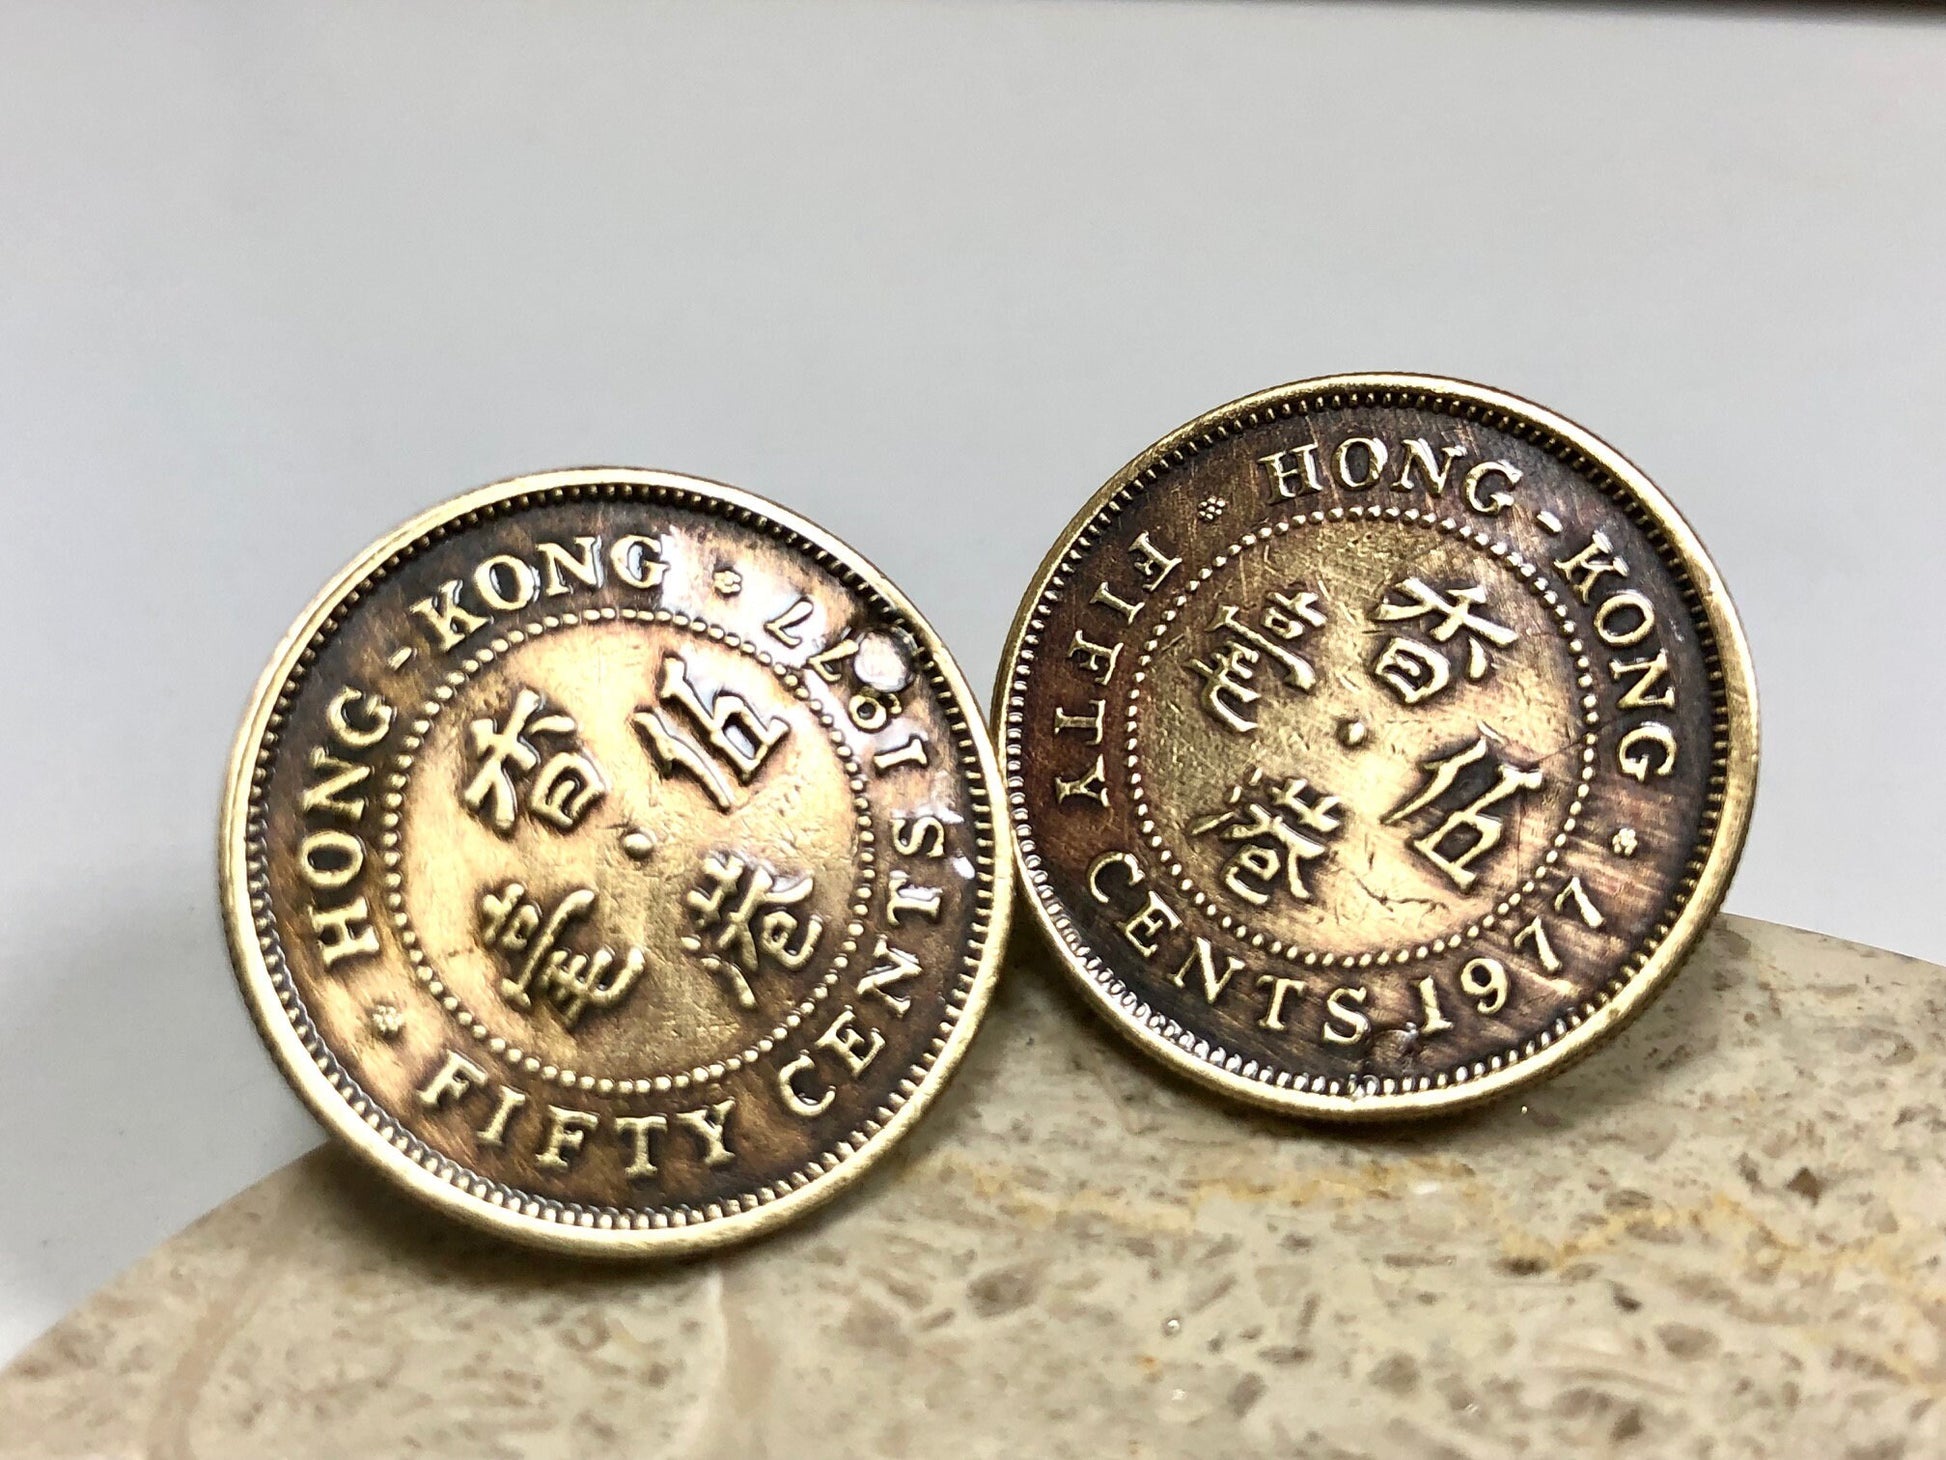 Hong Kong Coin Cuff Links China 50 Cents Jewelry Cufflinks Coin Charm Gift For Friend Charm Gift For Him, Her, Coin Collector, World Coins